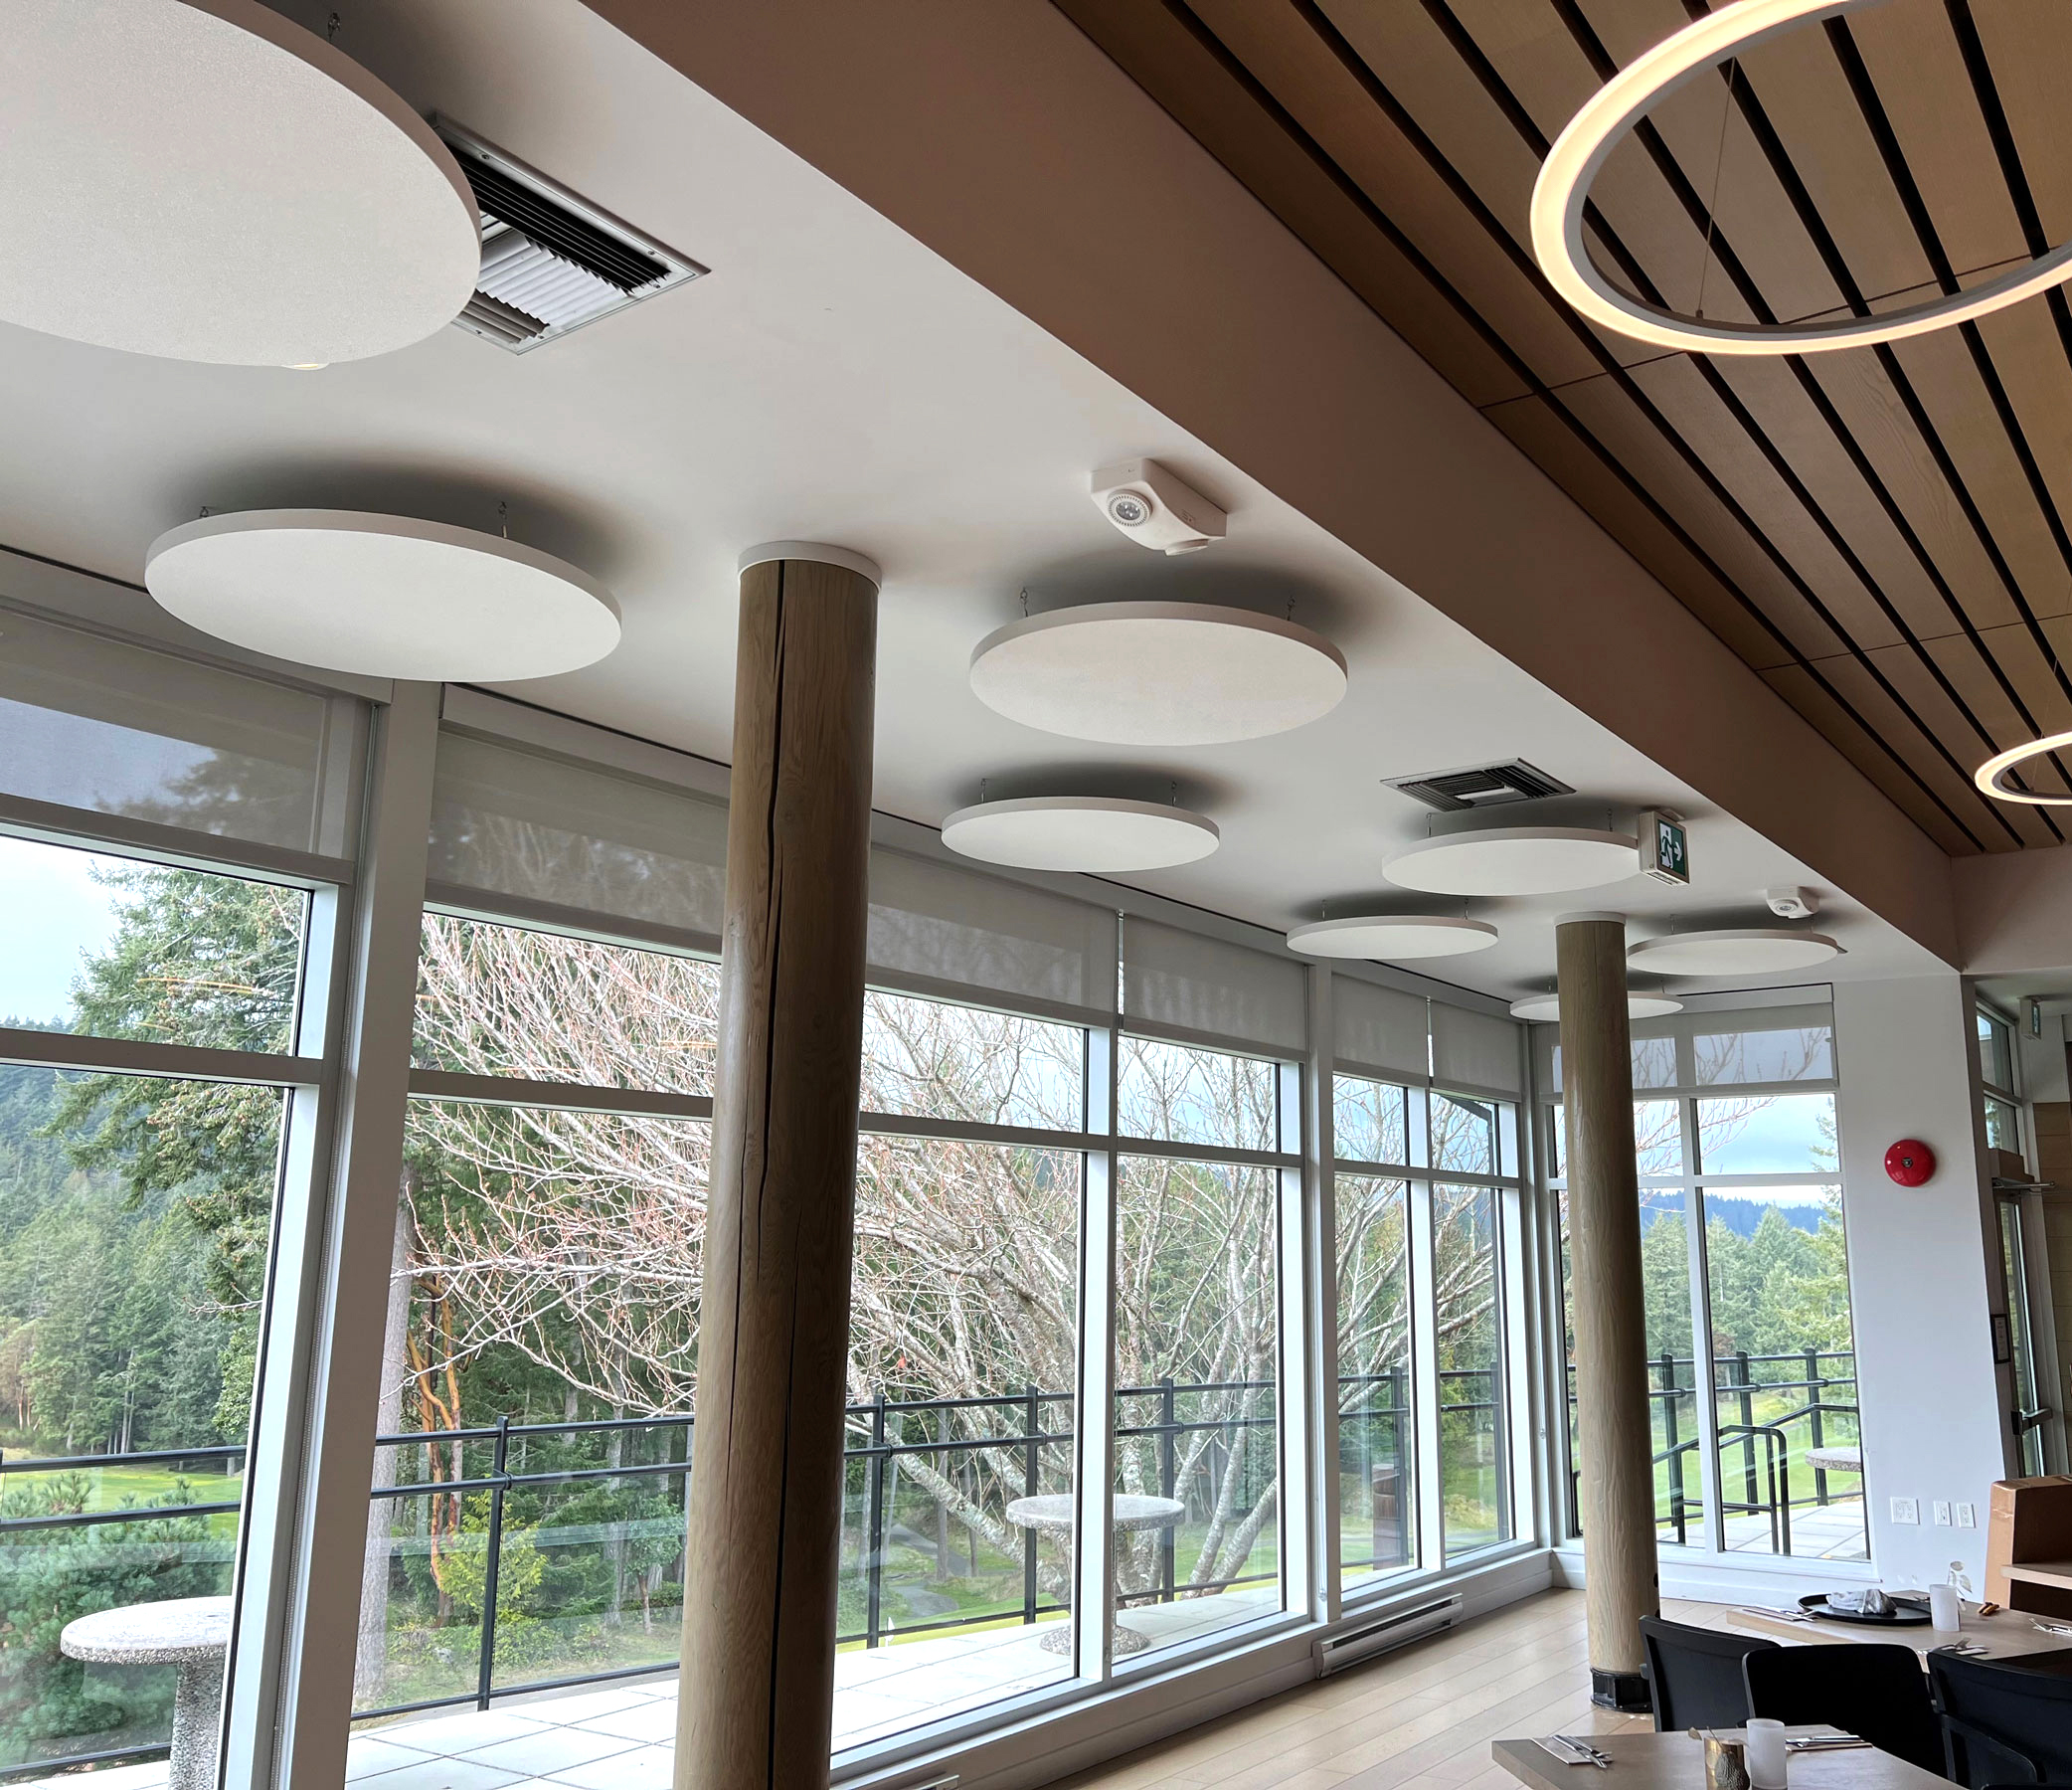 Golf course restaurant with white acoustic clouds on ceiling